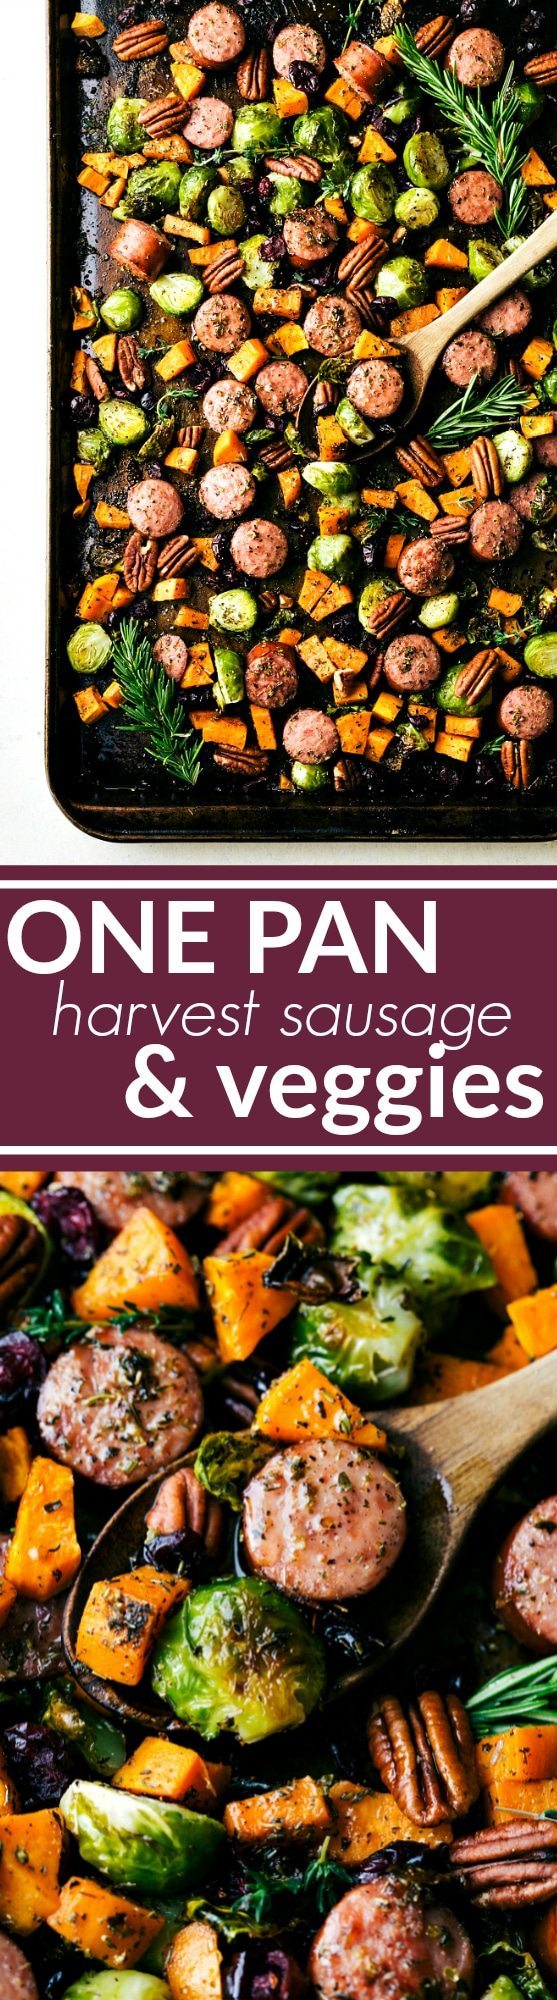 An easy one pan meal -- harvest herb-seasoned sausage and veggies baked together and topped with dried cranberries and pecans. Delicious, hearty, and healthy! Recipe via chelseasmessyapron.com